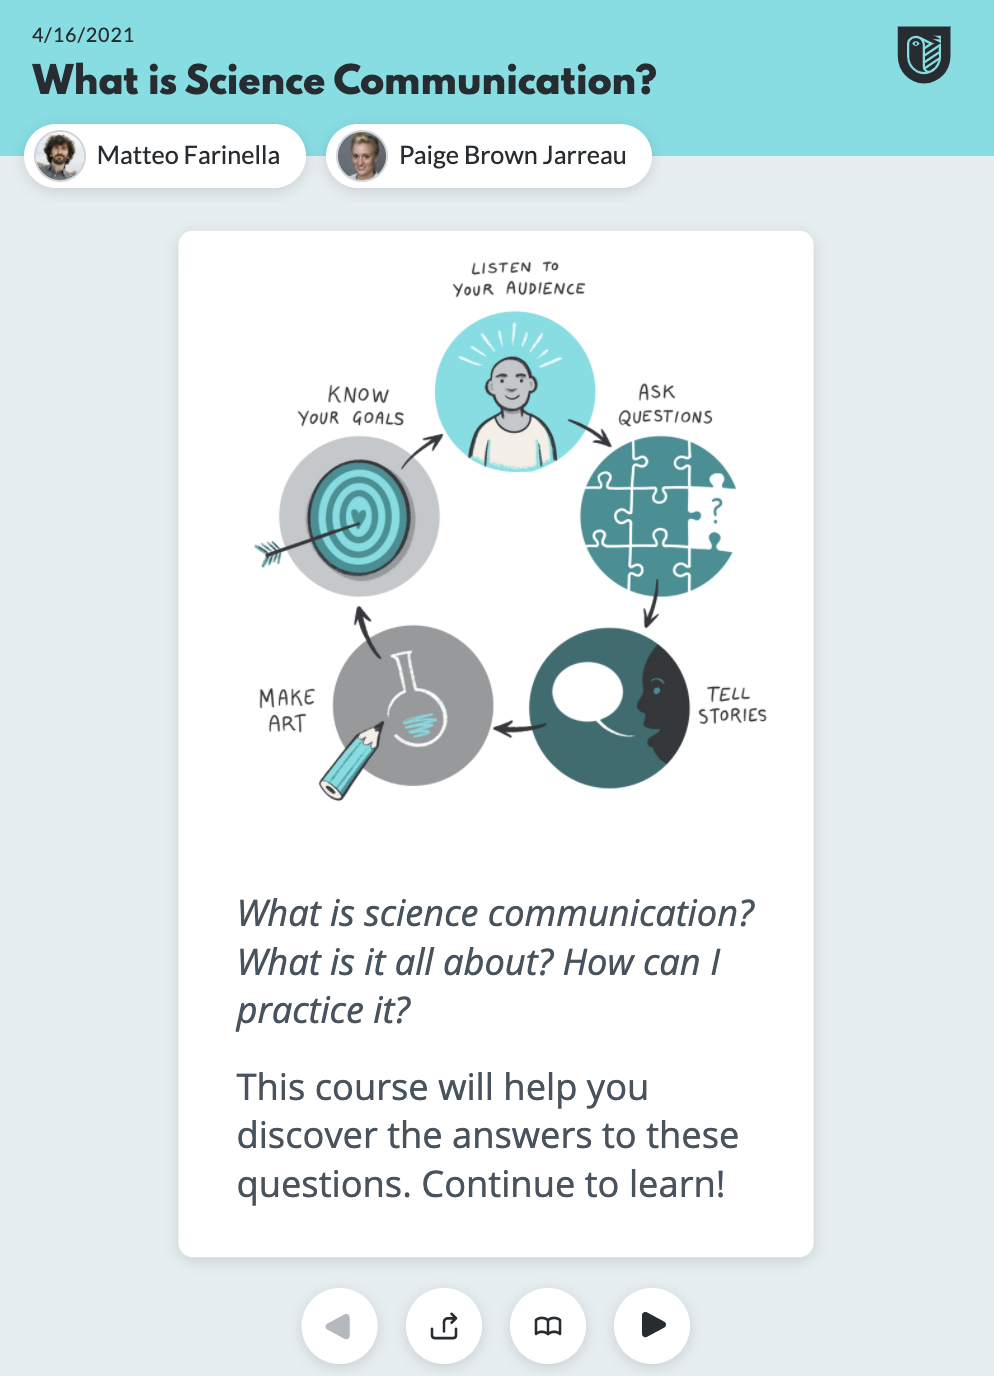 A screenshot of the Lifeology Uni SciComm Course "What is Science Communication". The image shows how the course looks on a mobile device and shows the front cover image and text.